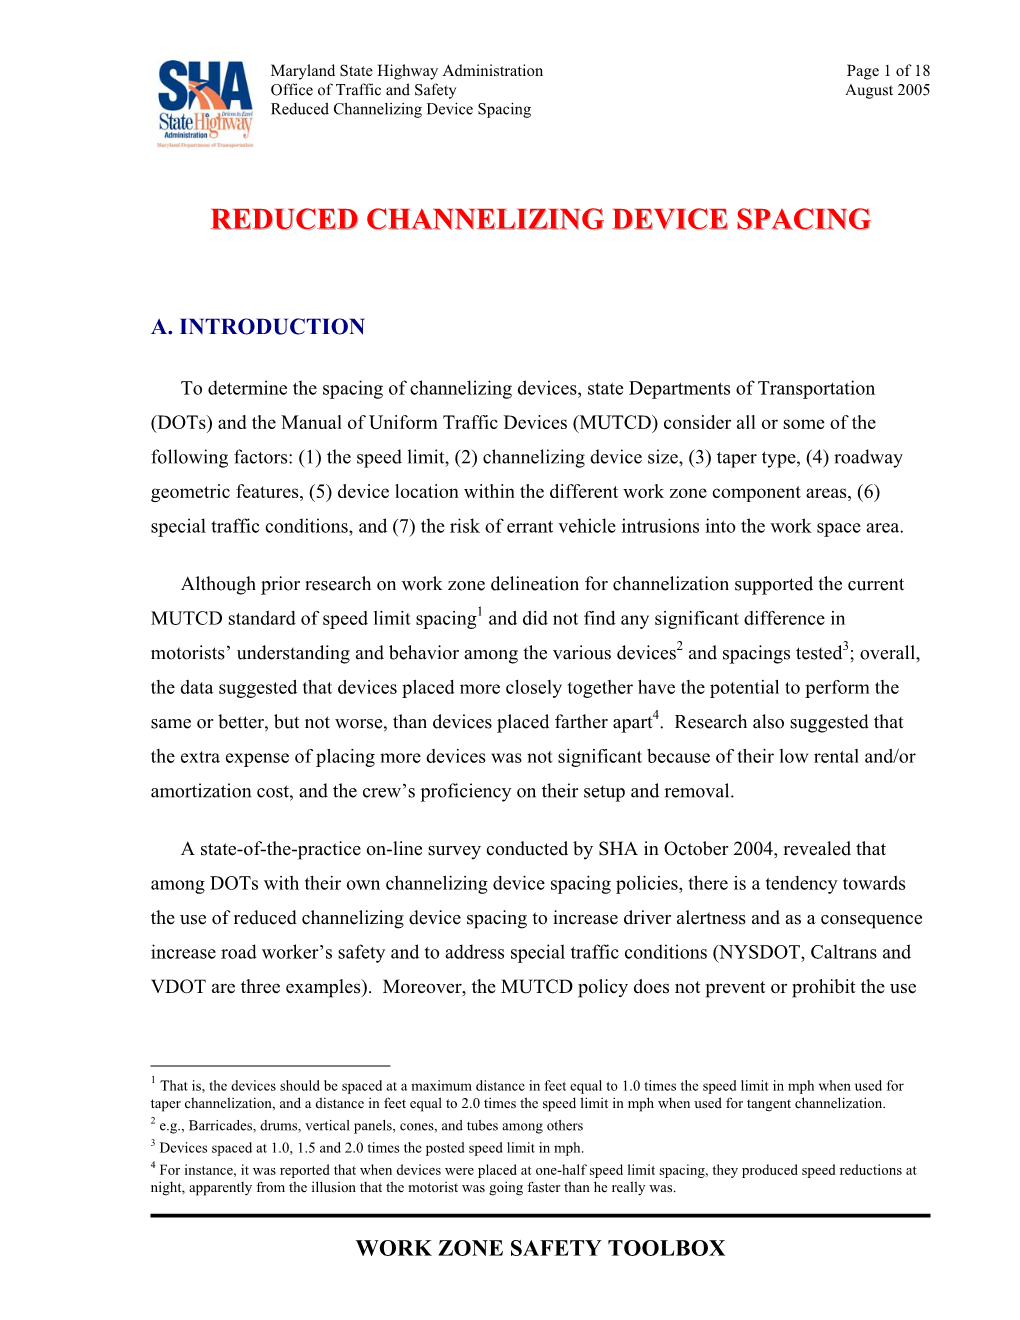 Reduced Channelization Device Spacing